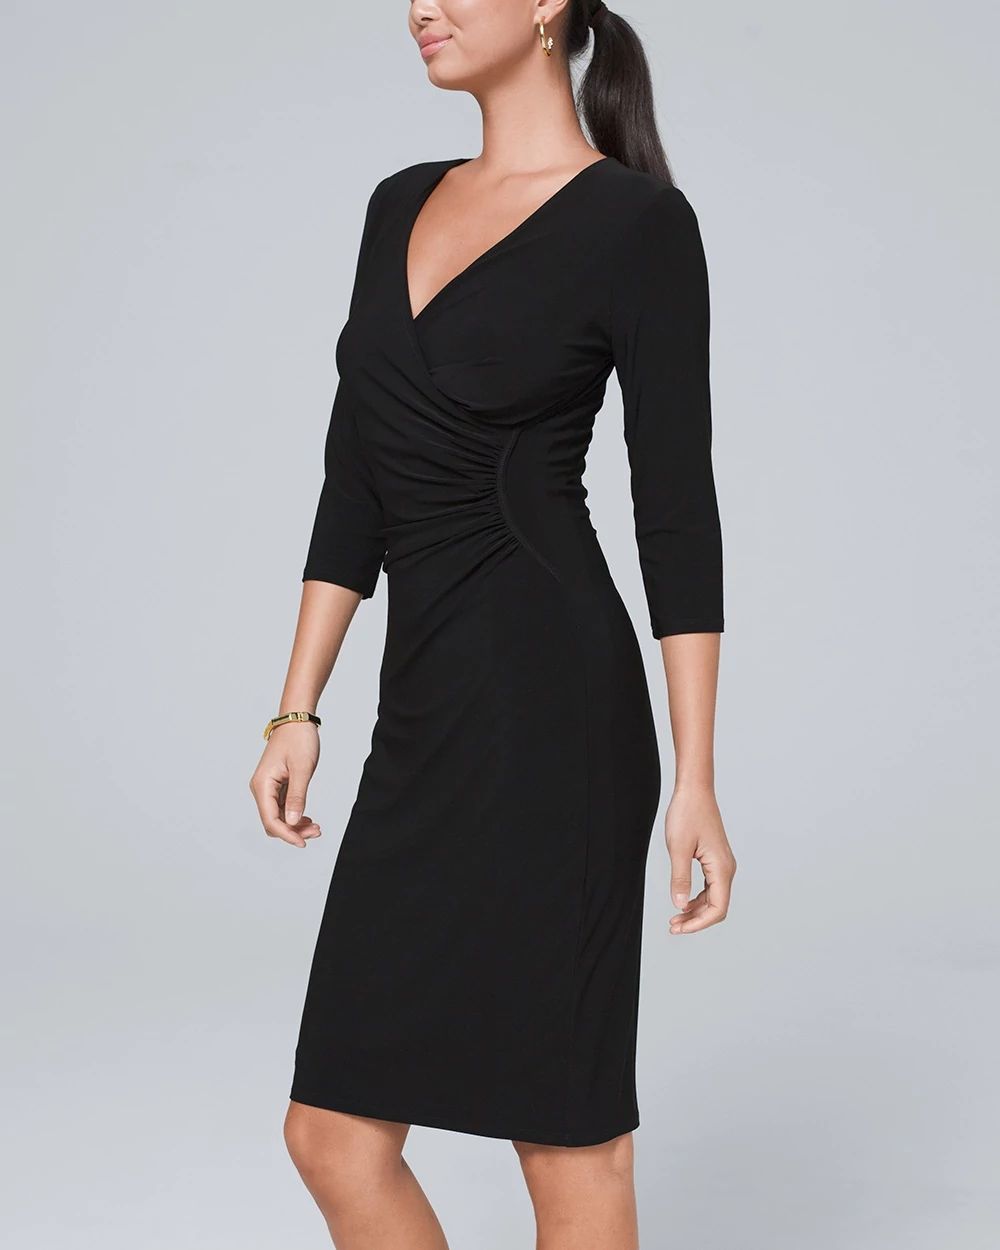 Ruched Sheath Dress click to view larger image.